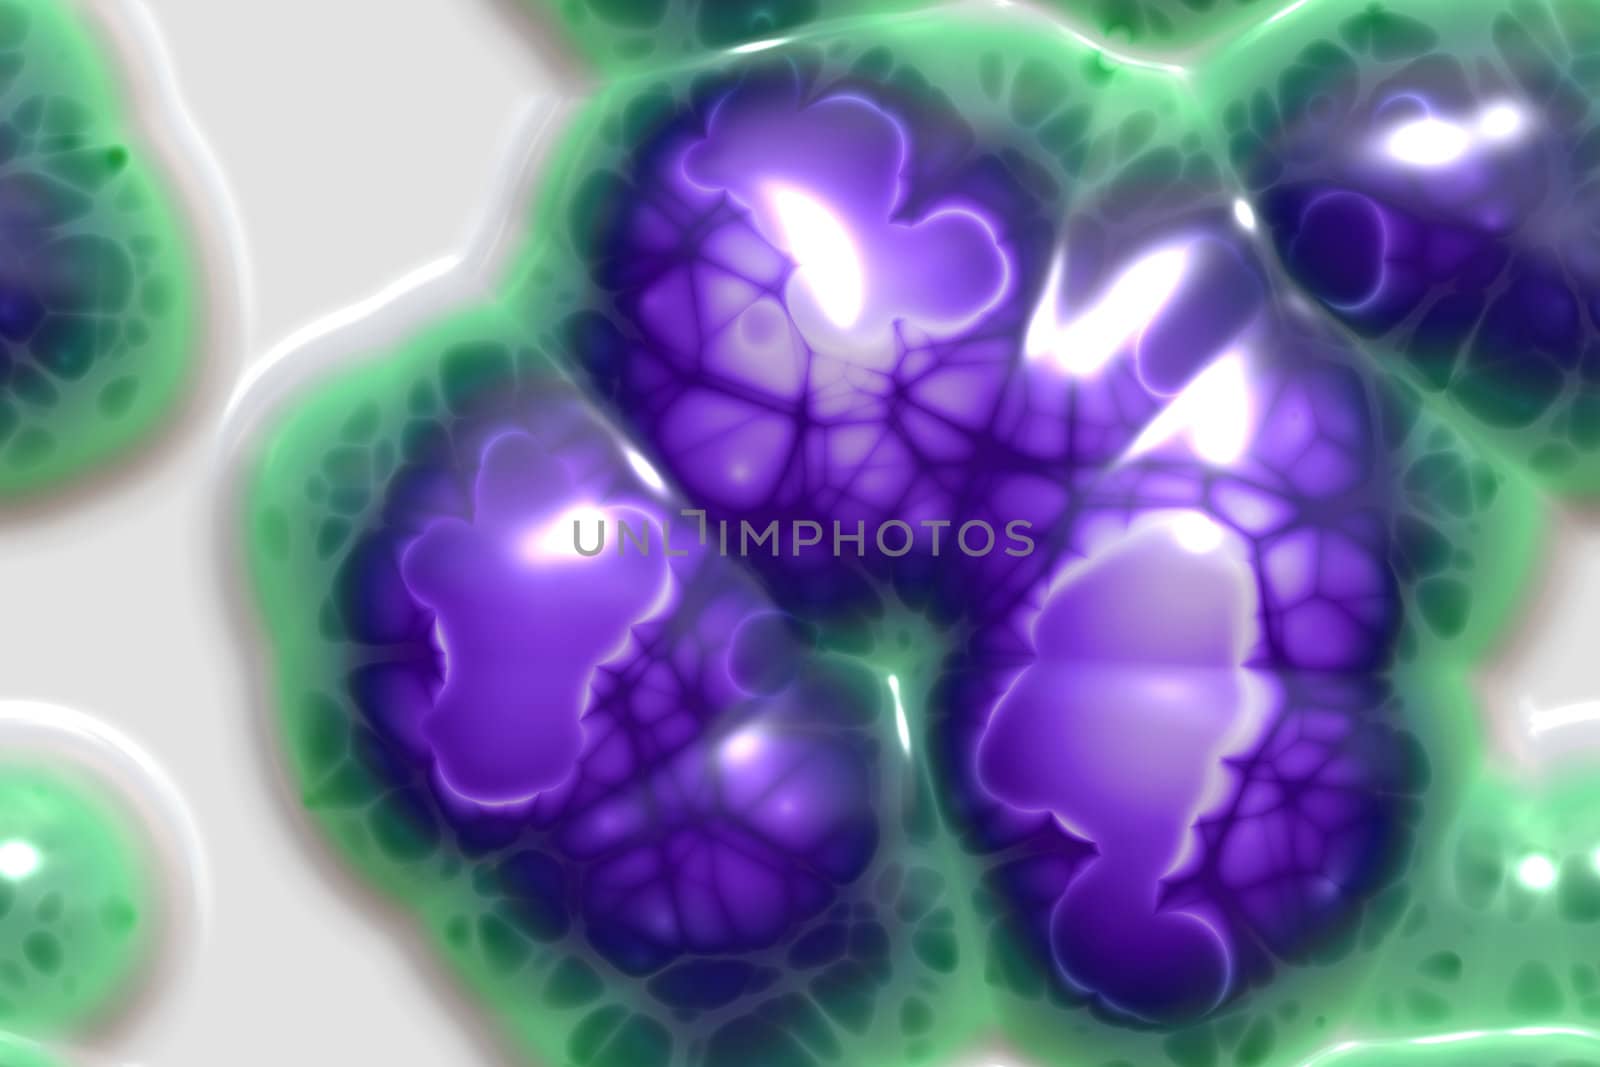 A 3D illustration of some purple organic brain matter- this tiles seamlessly as a pattern.